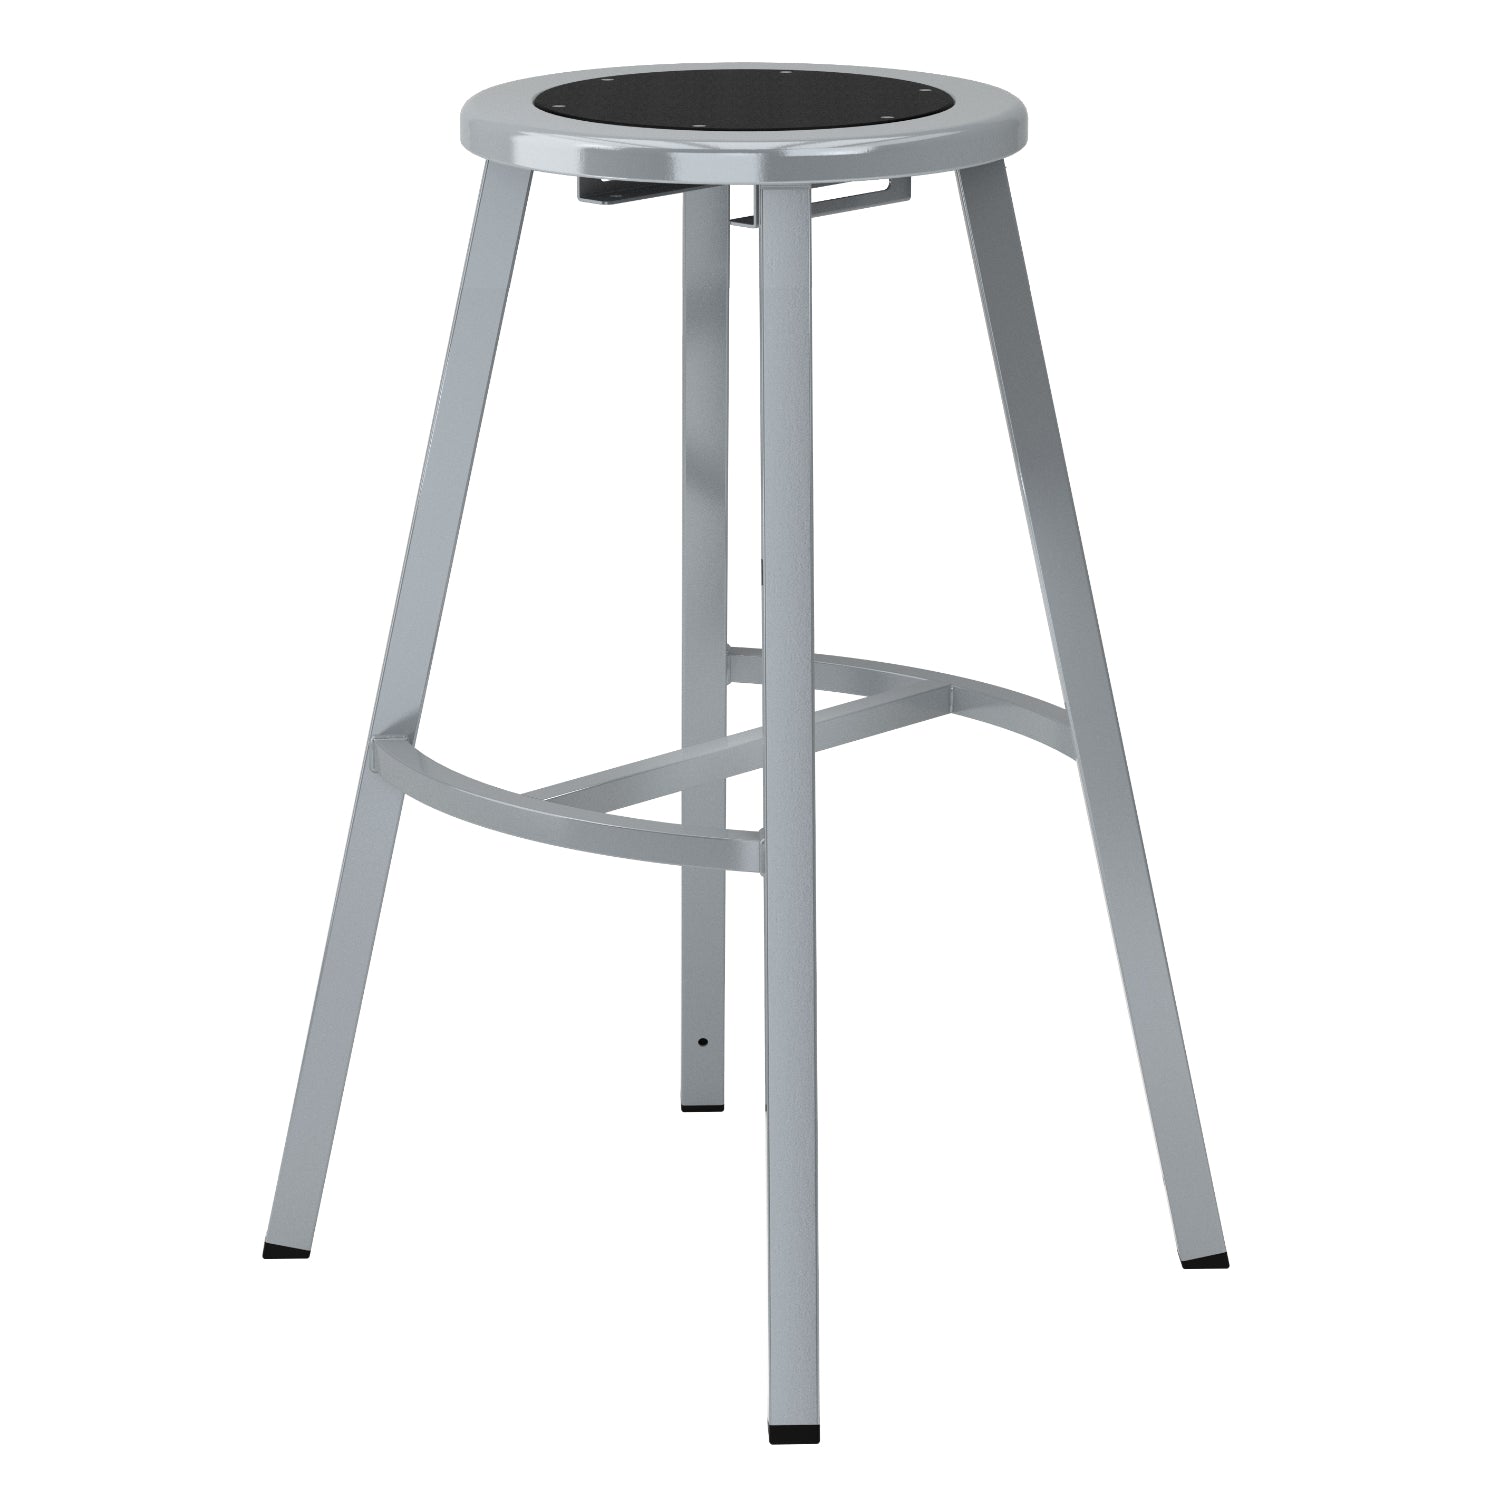 Titan Stool, Steel Seat with Black Poly Center, 30" H